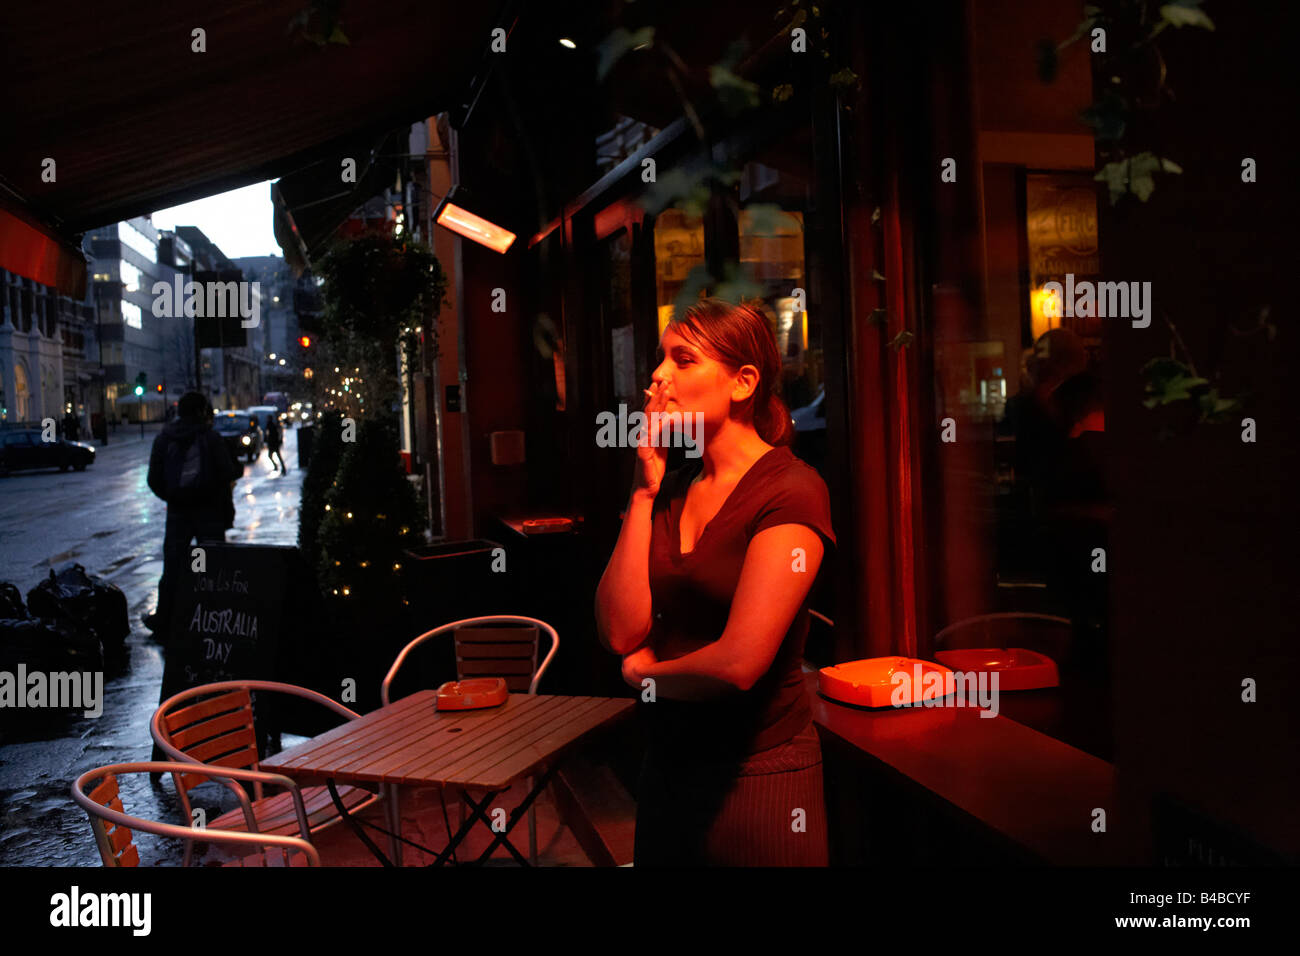 On a rainy night a young lady smokes under a heated sheltered smokers' zone outside a bar in London Stock Photo